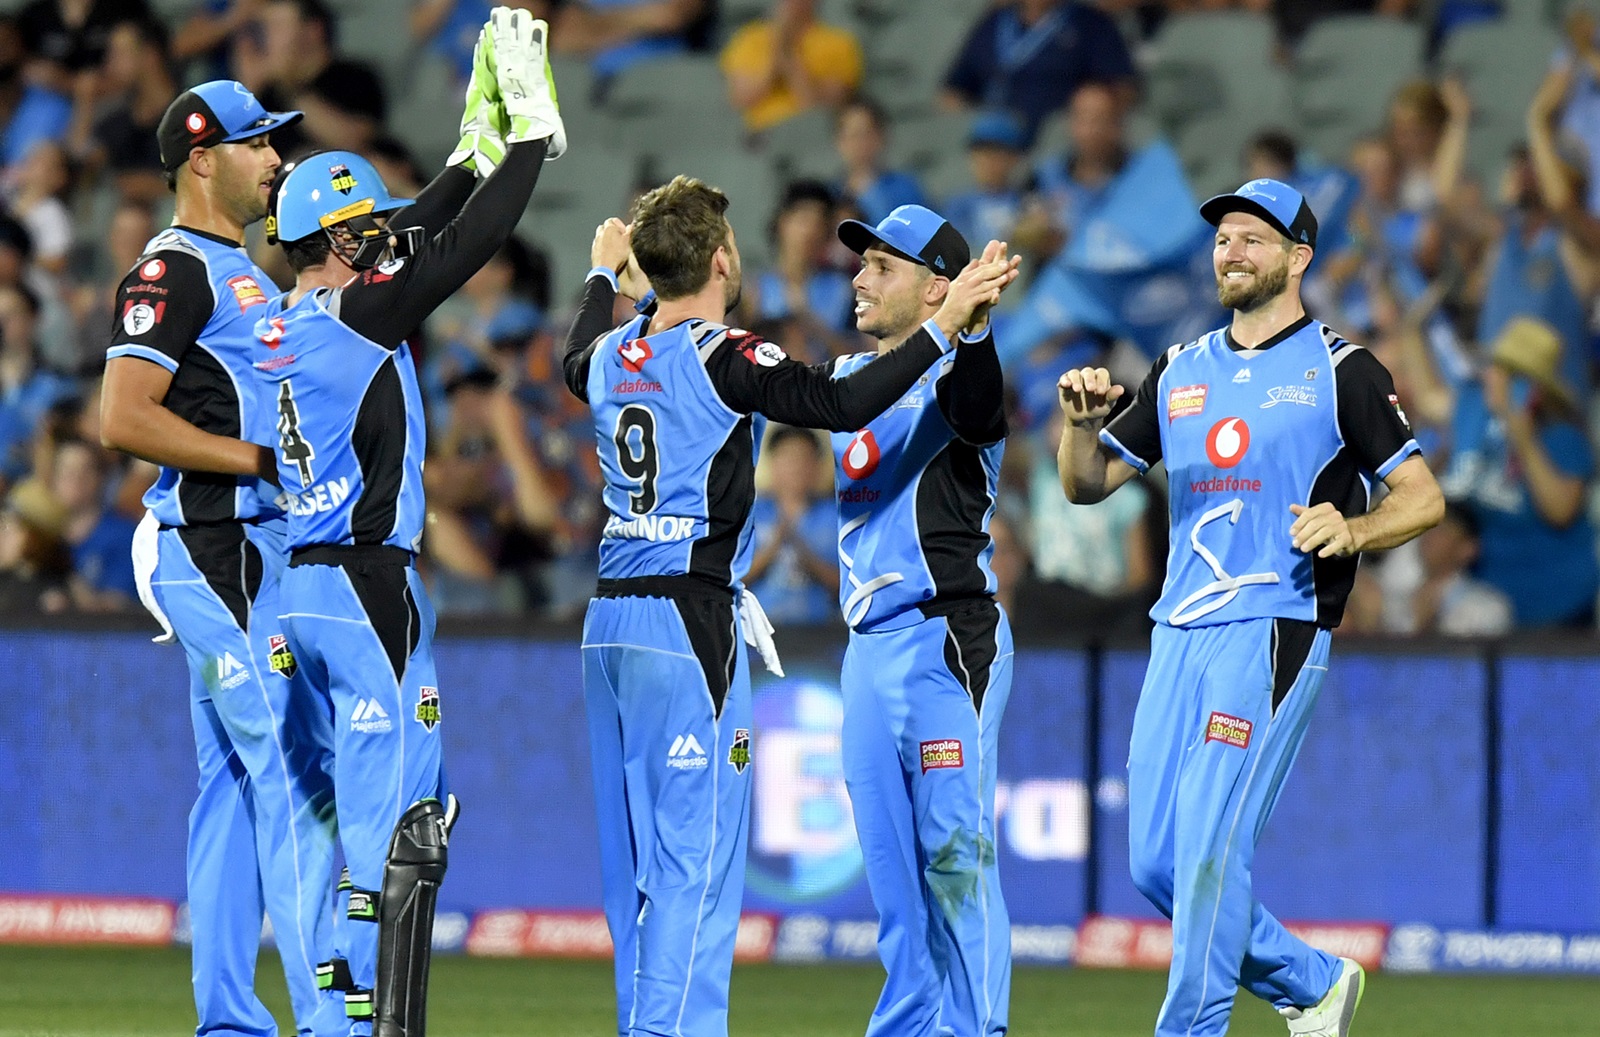 BBL 2020: Adelaide Strikers Team Preview, Key Players and Prediction